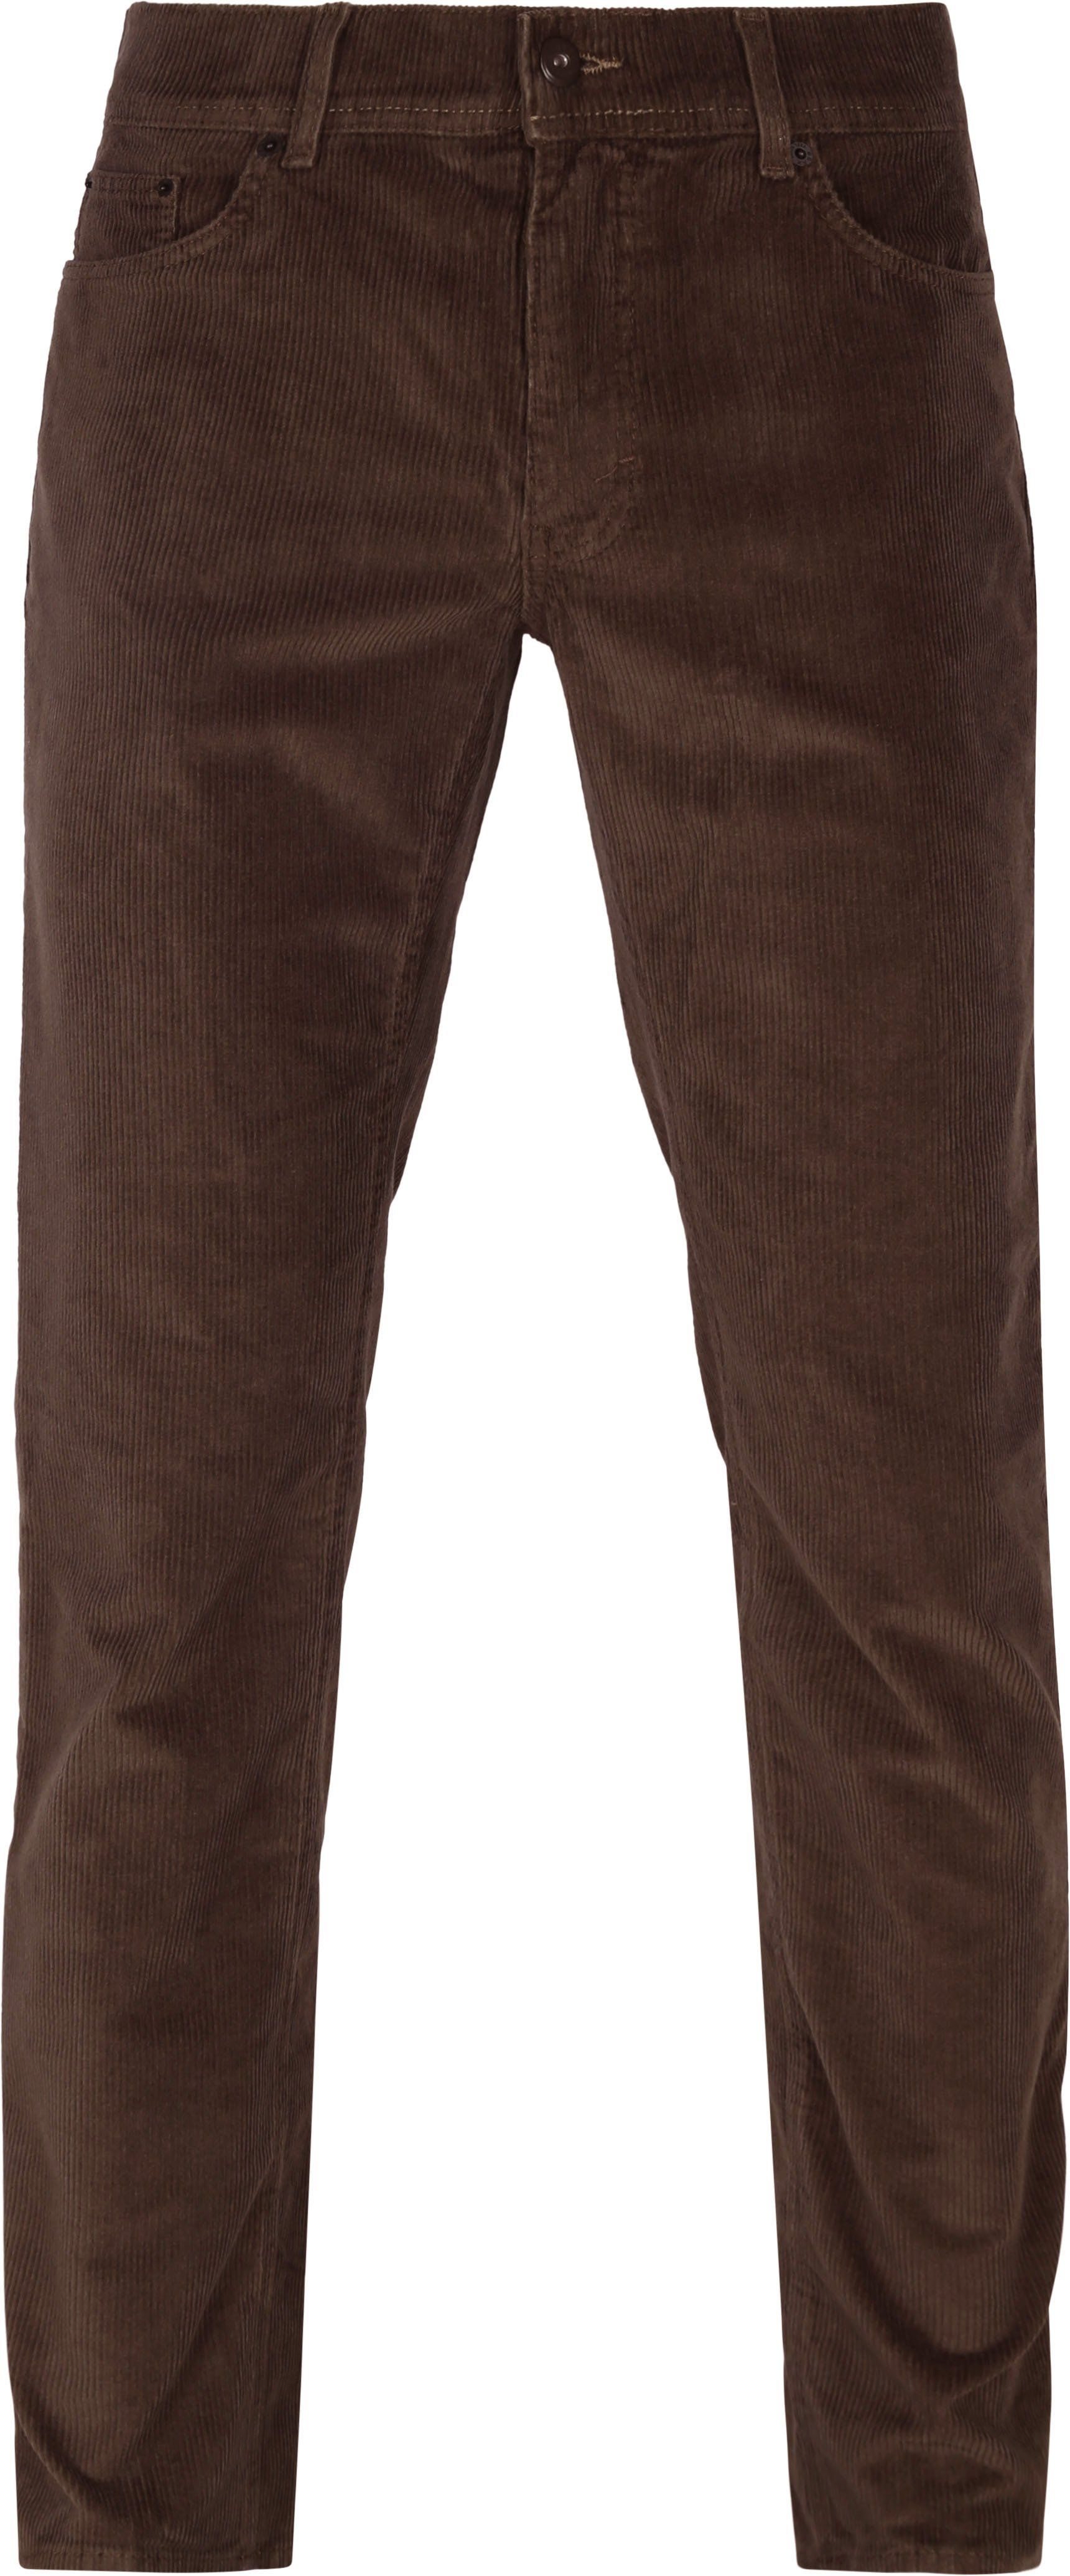 Brax Cooper Trousers Corduroy Brown size W 40 product